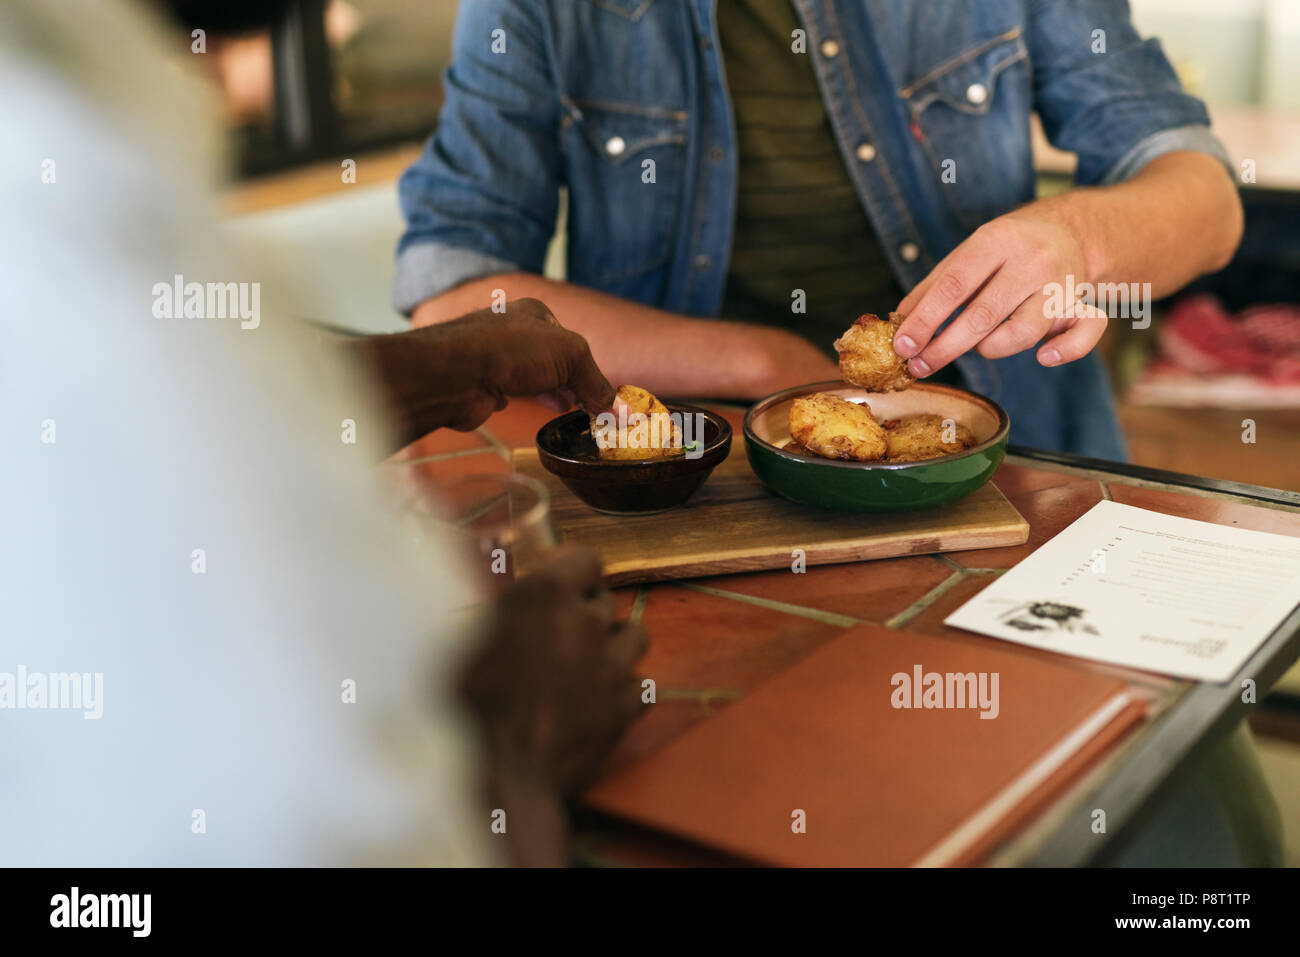 Two men sitting at a bistro table sharing delicious food  Stock Photo